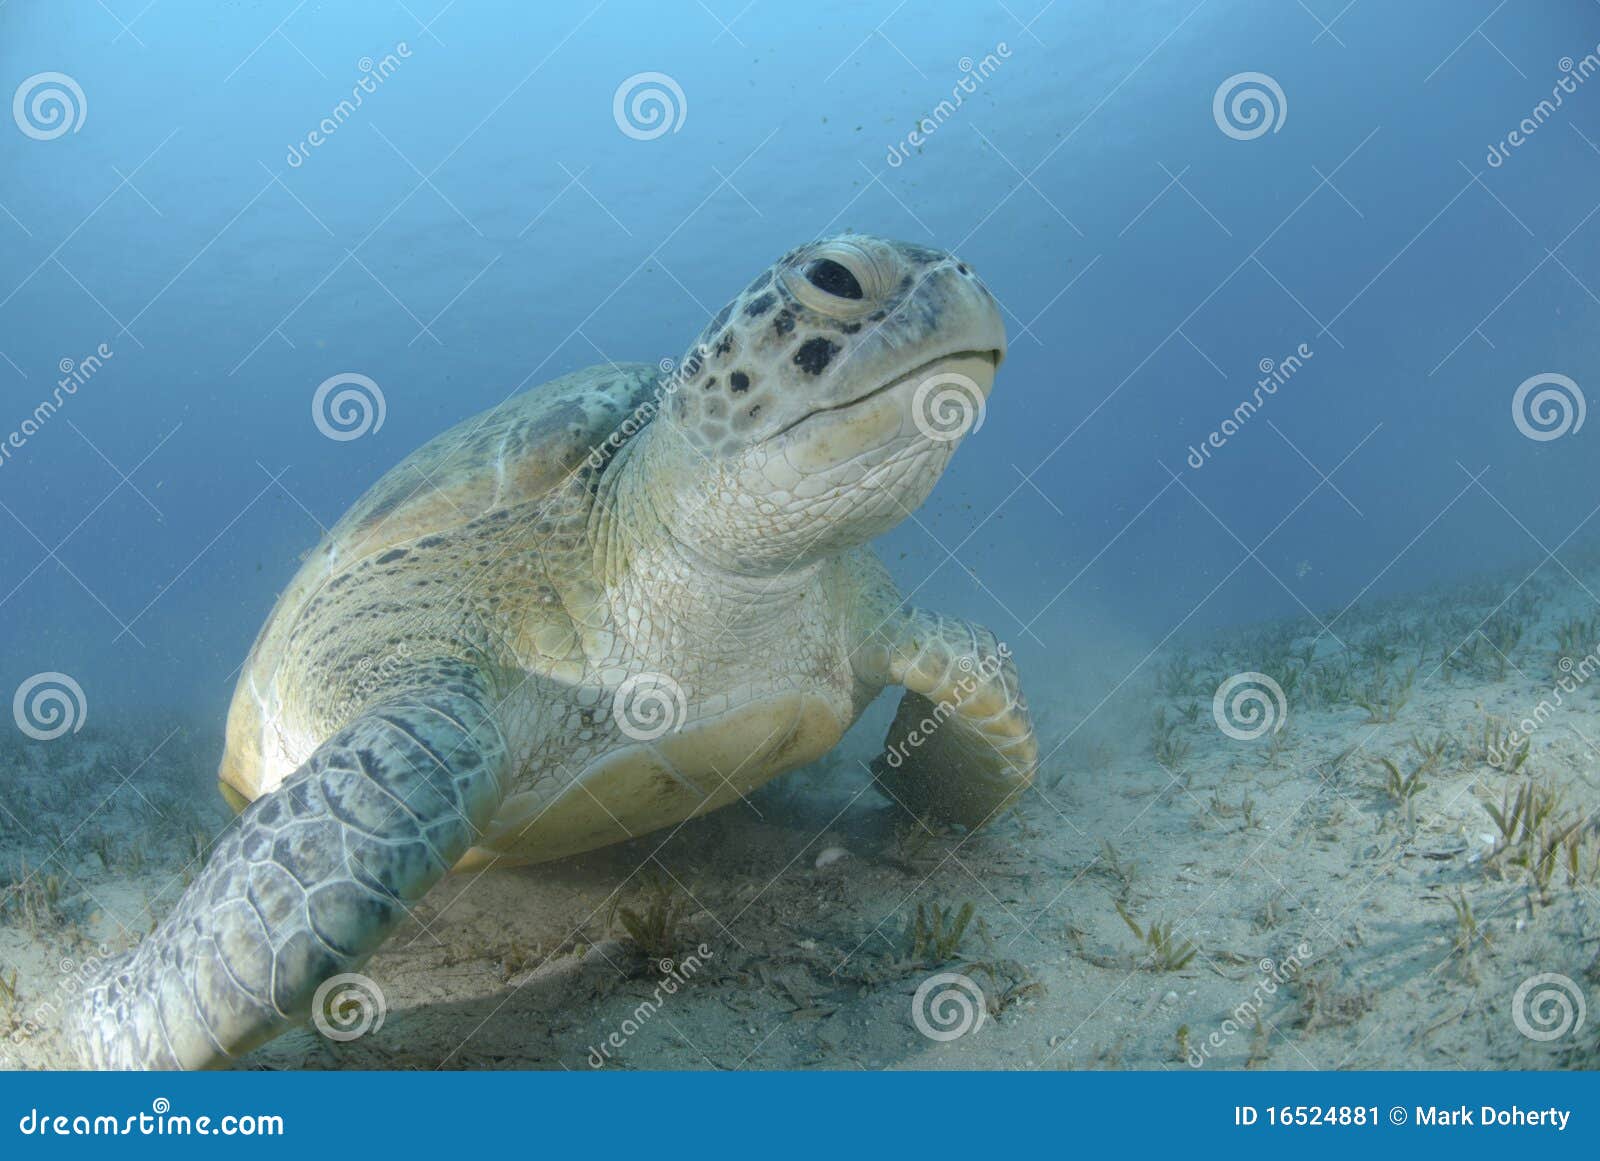 green turtle on a bed of seagrass.